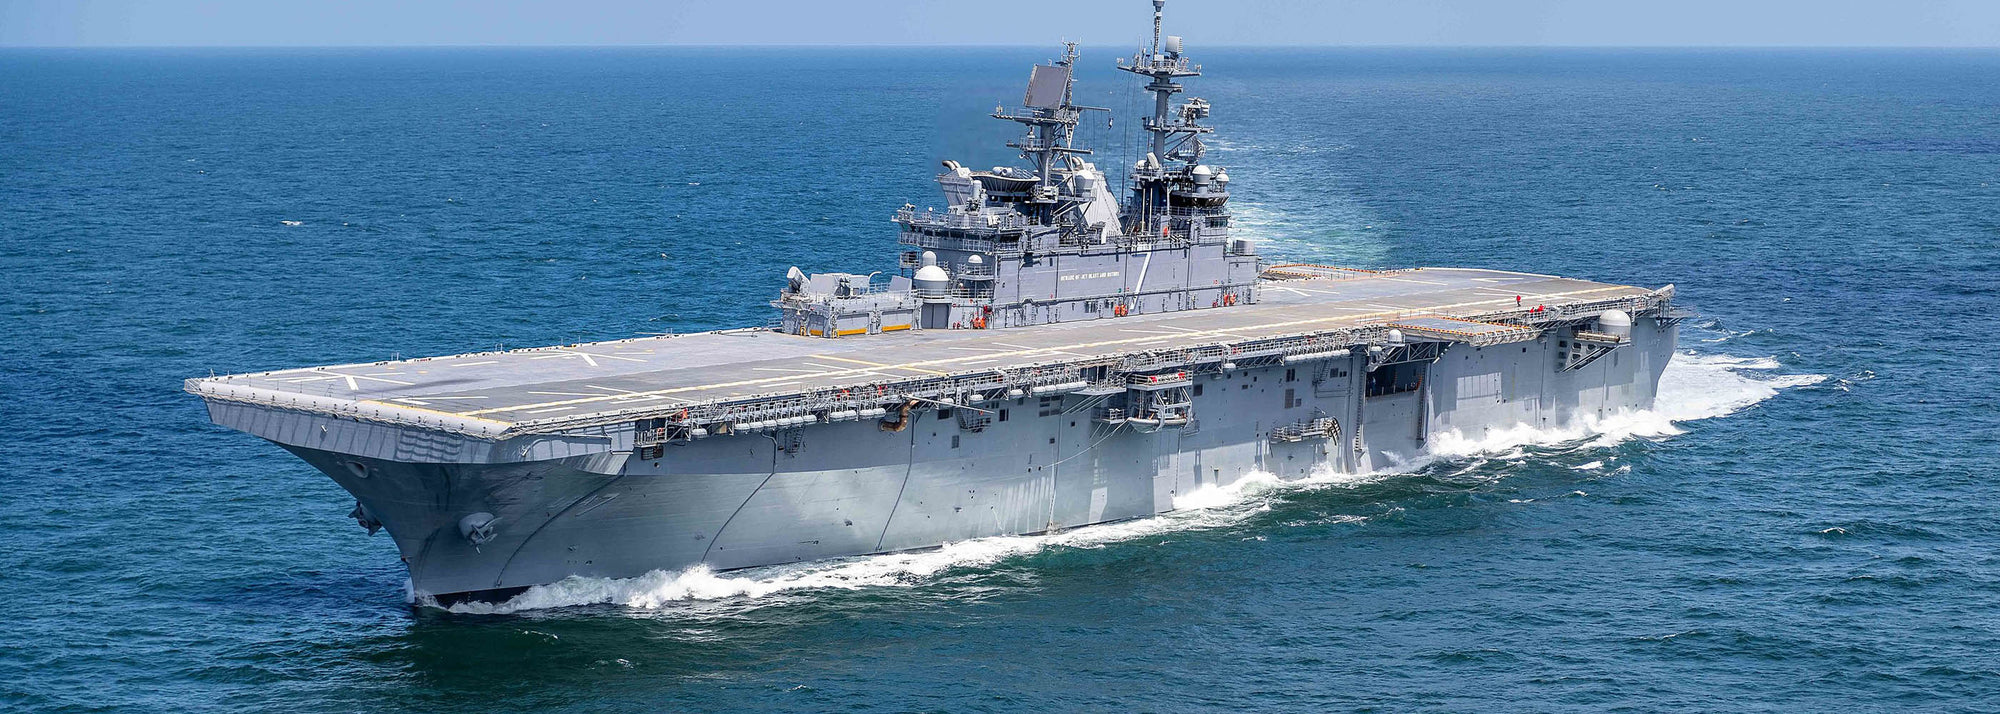 USS Tripoli (LHA-7) underway in the Gulf of Mexico in July 2019